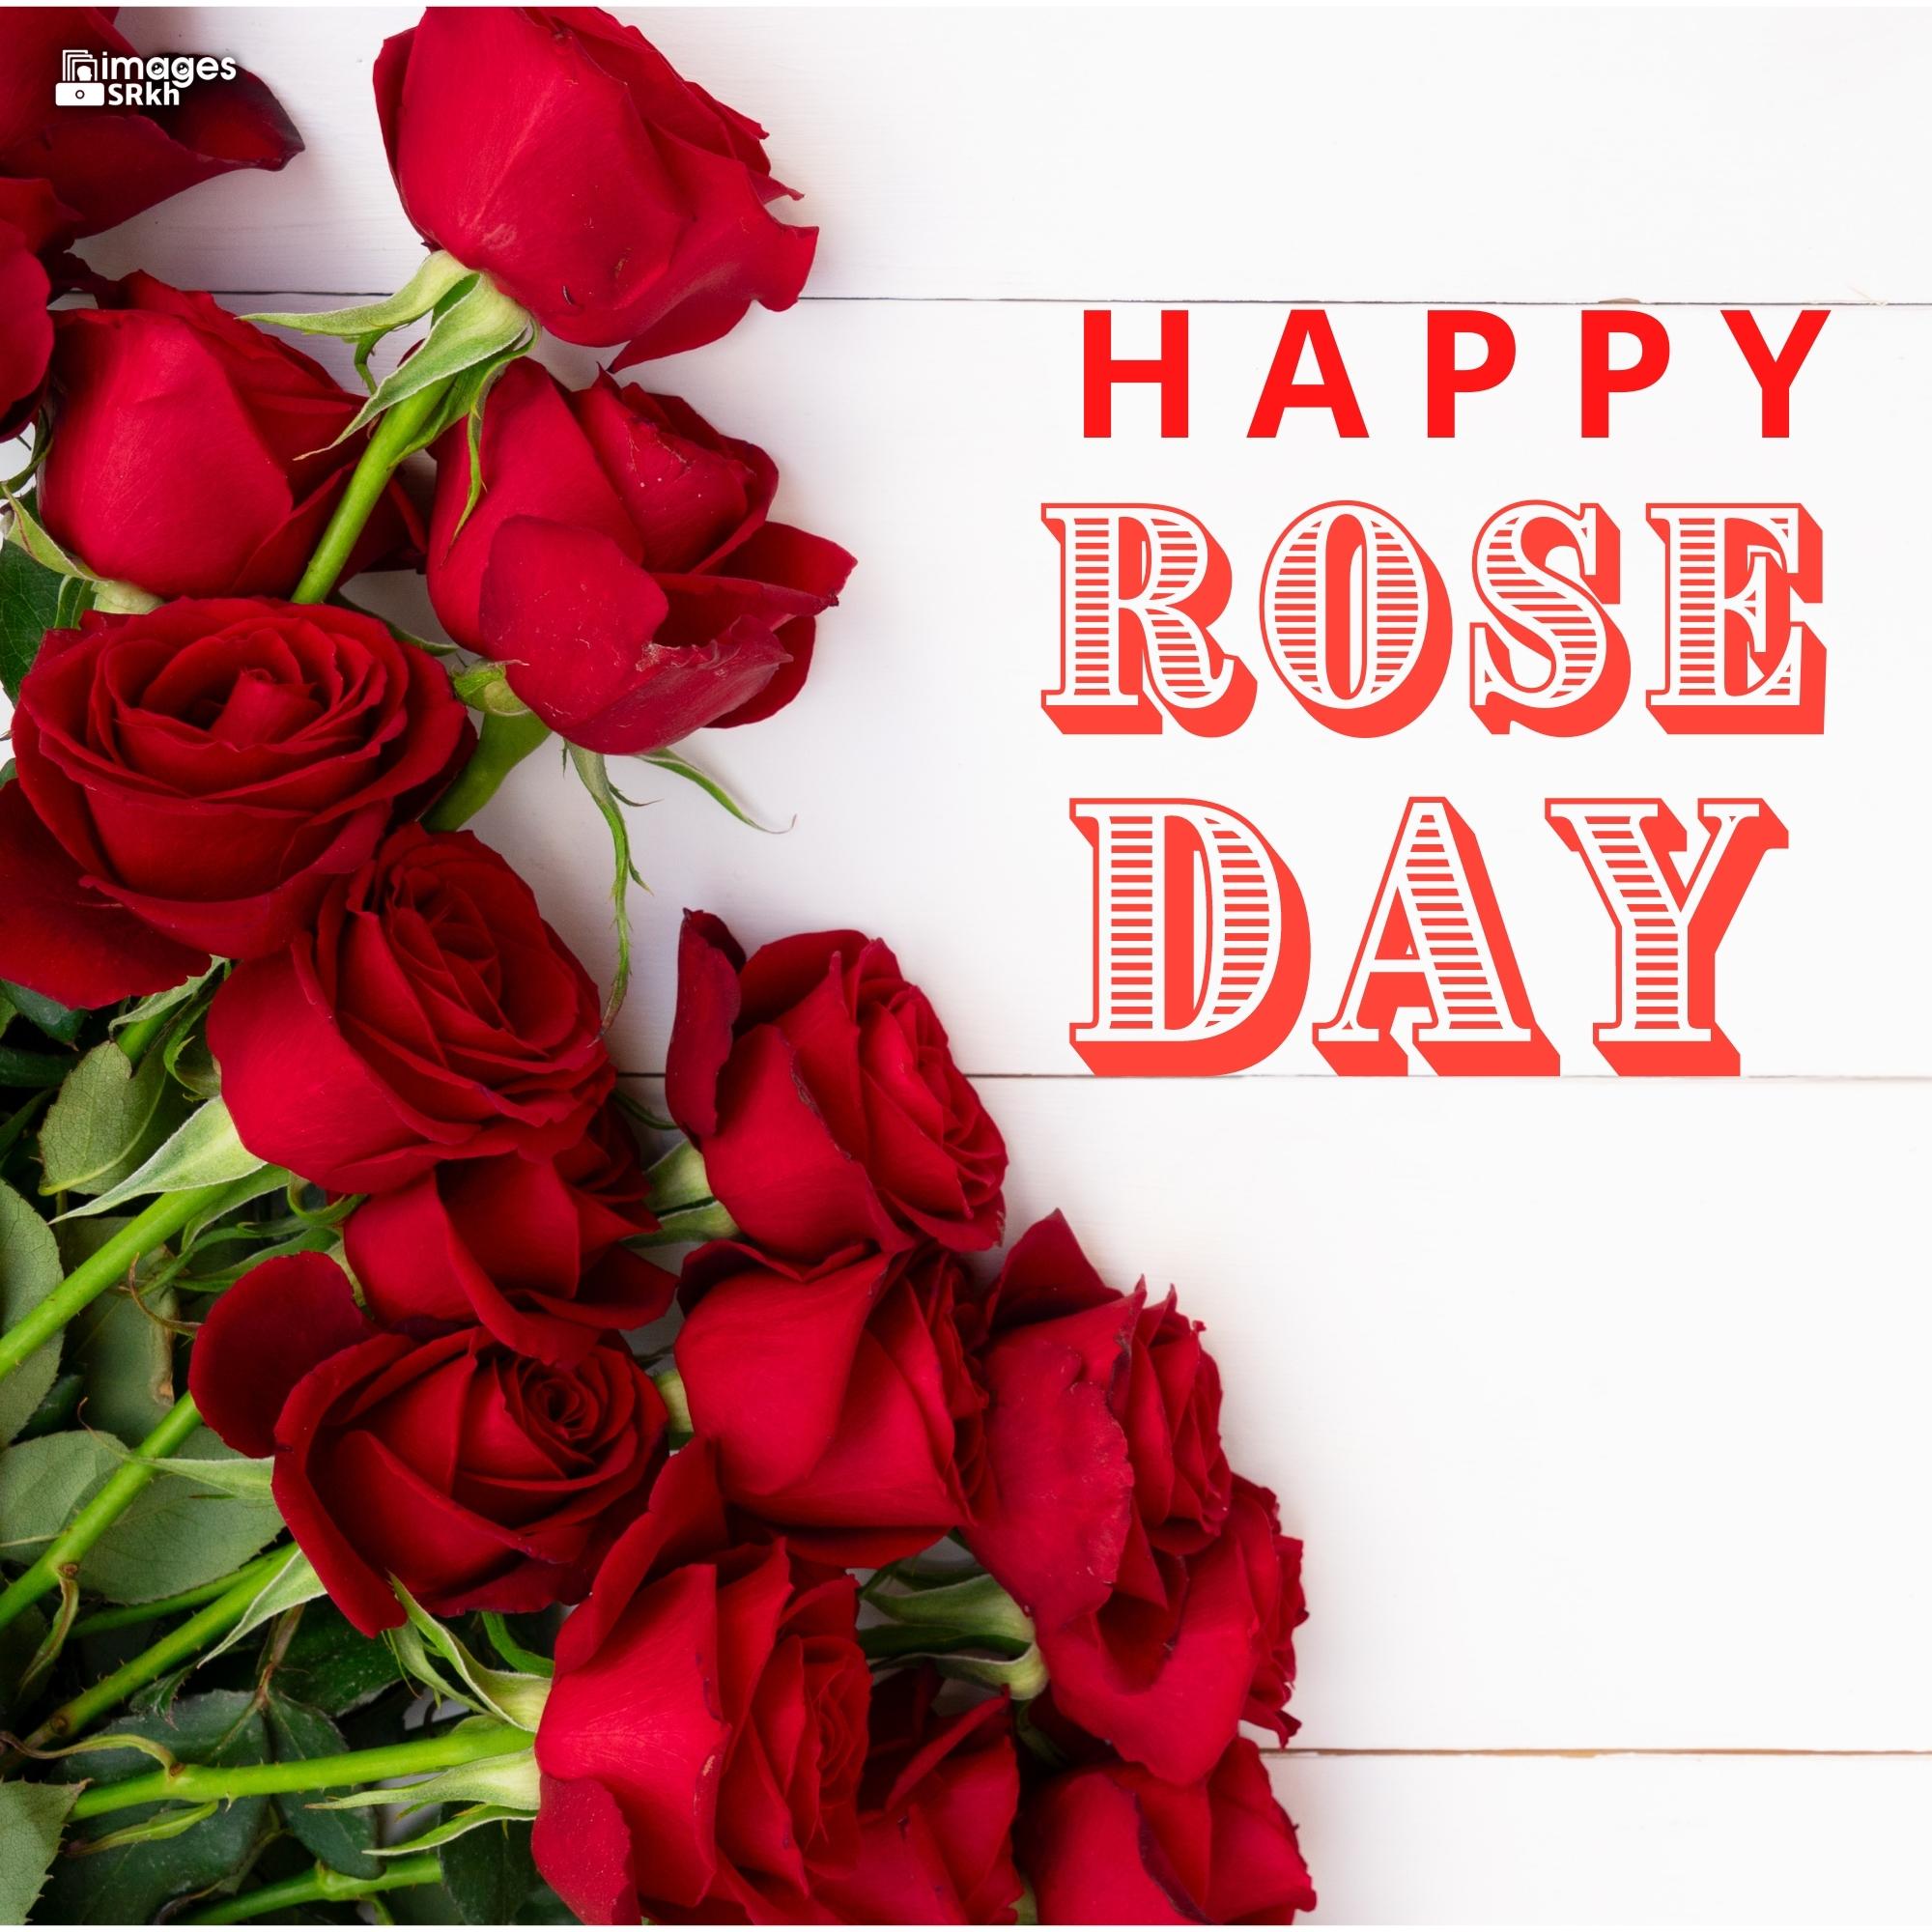 Happy Rose Day Image Hd Download (56)